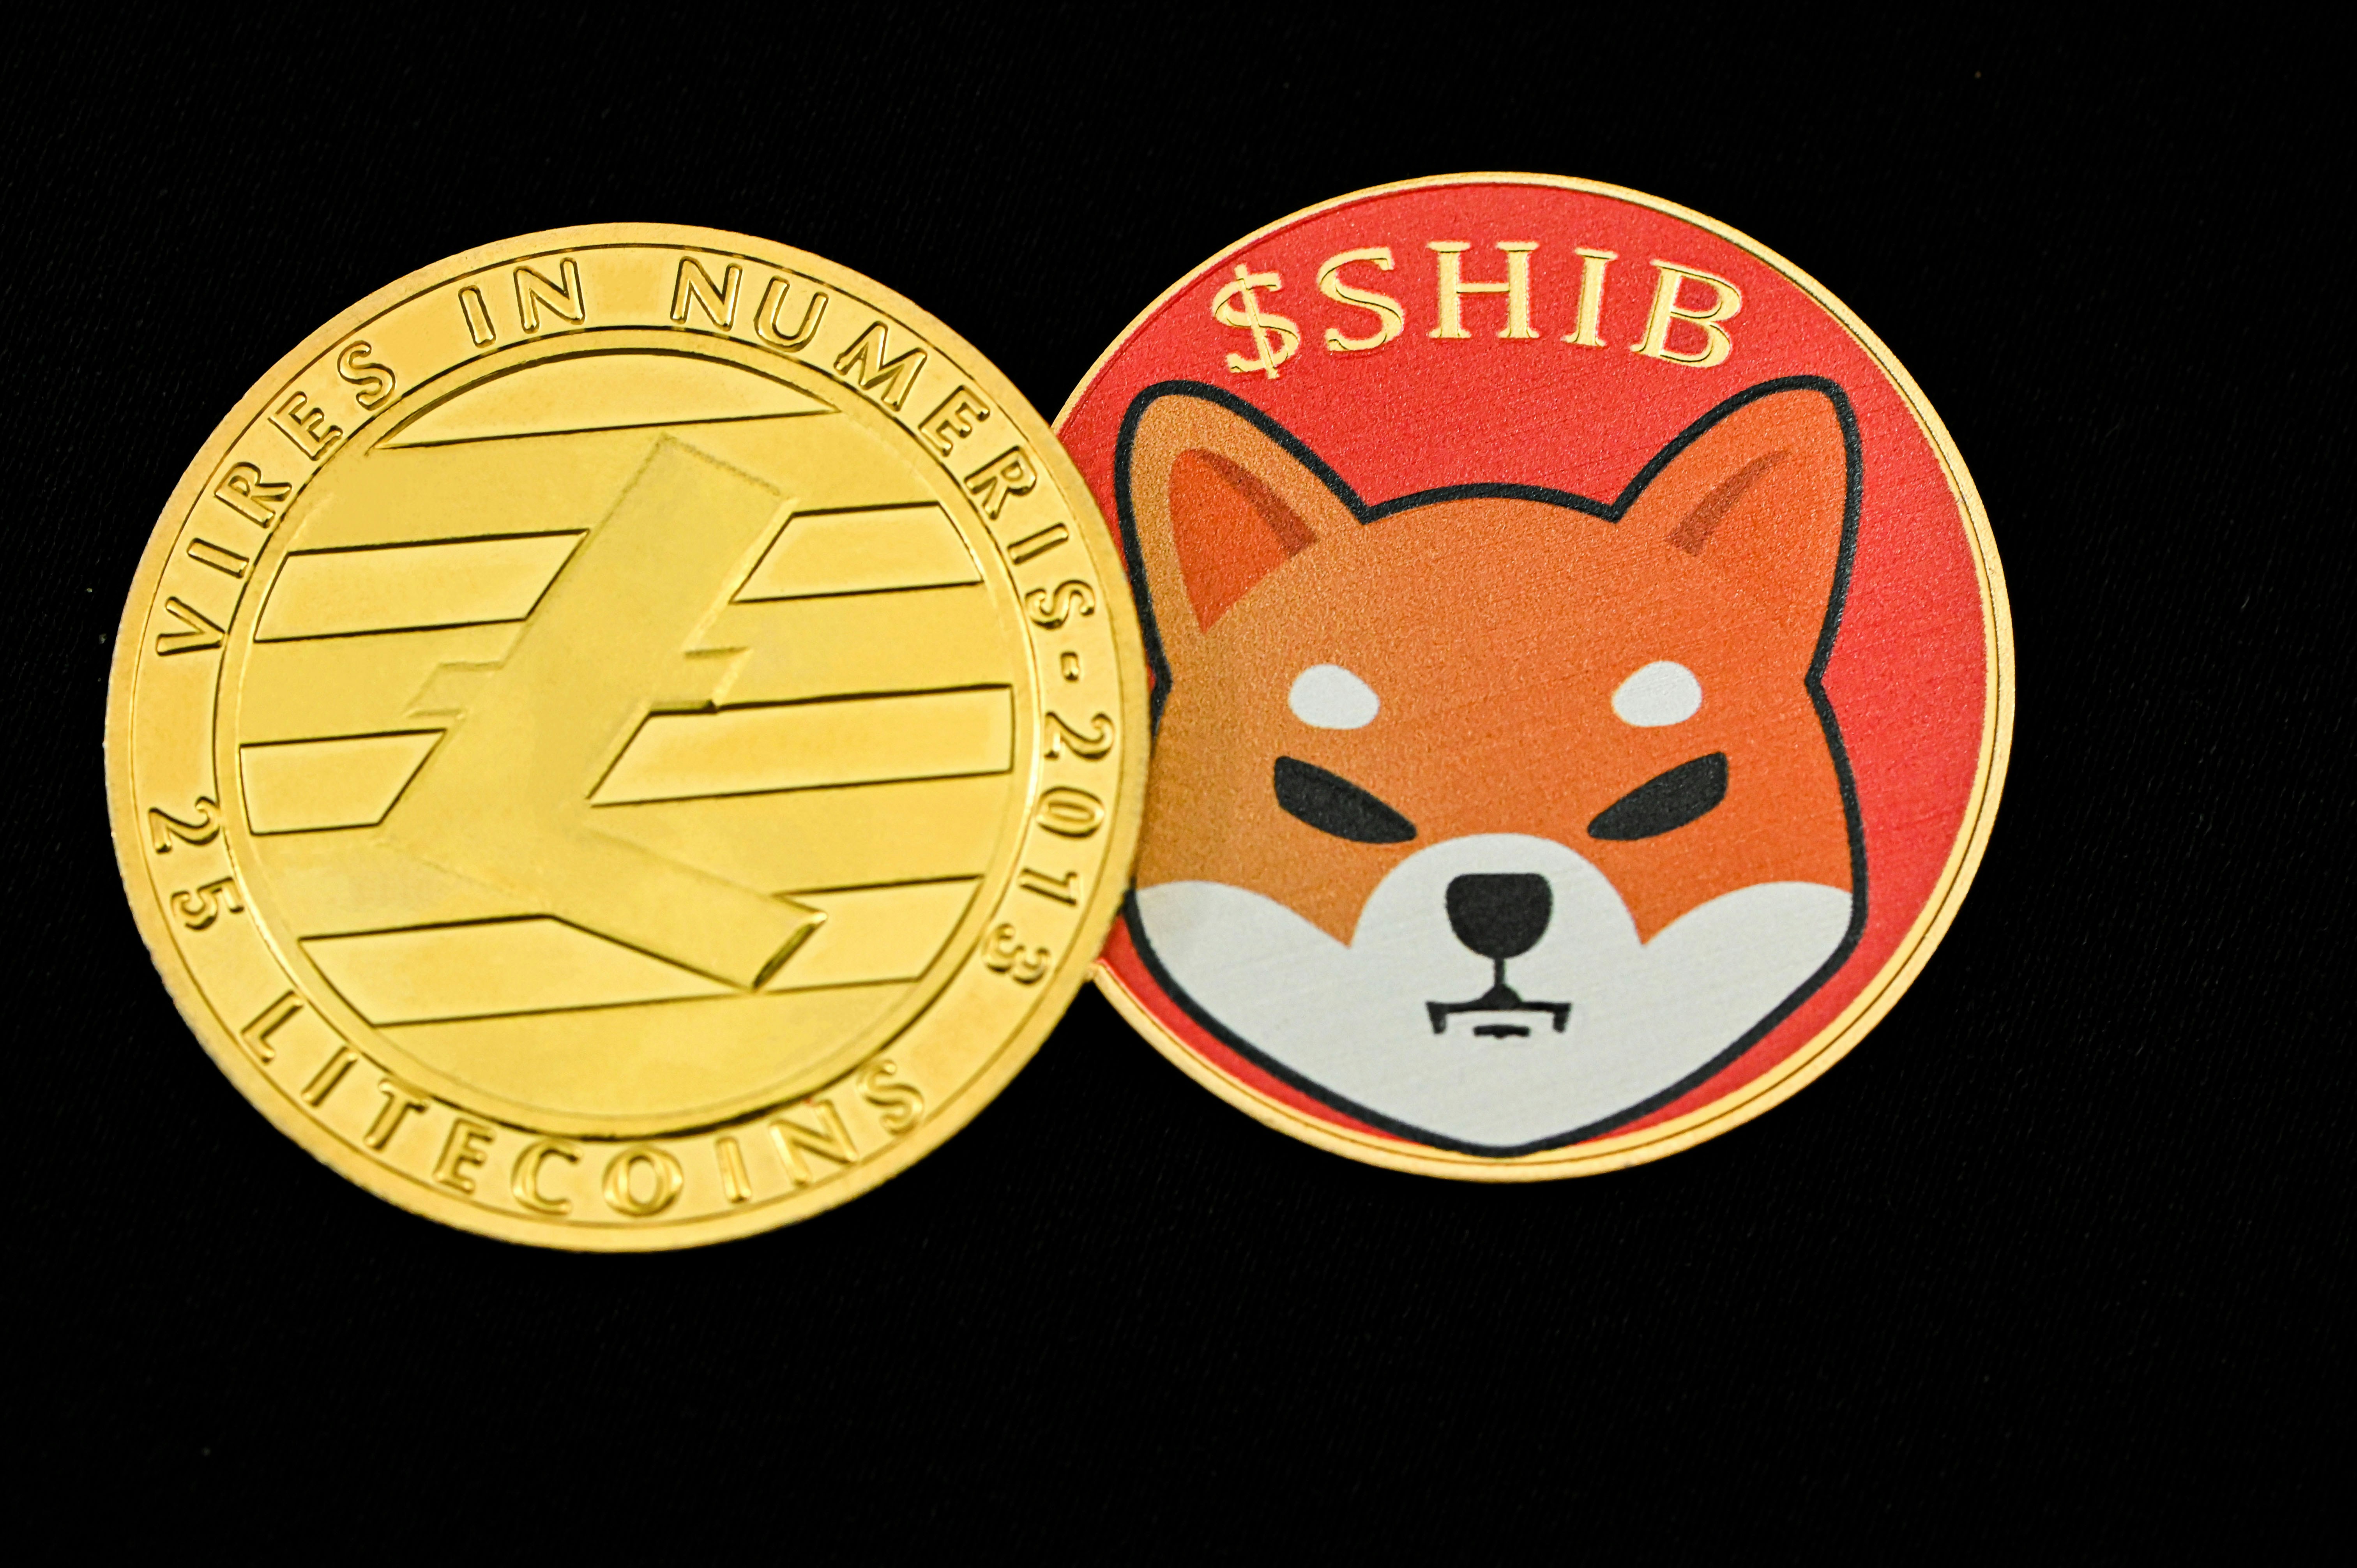 Litecoin and SHIB coin next to each other